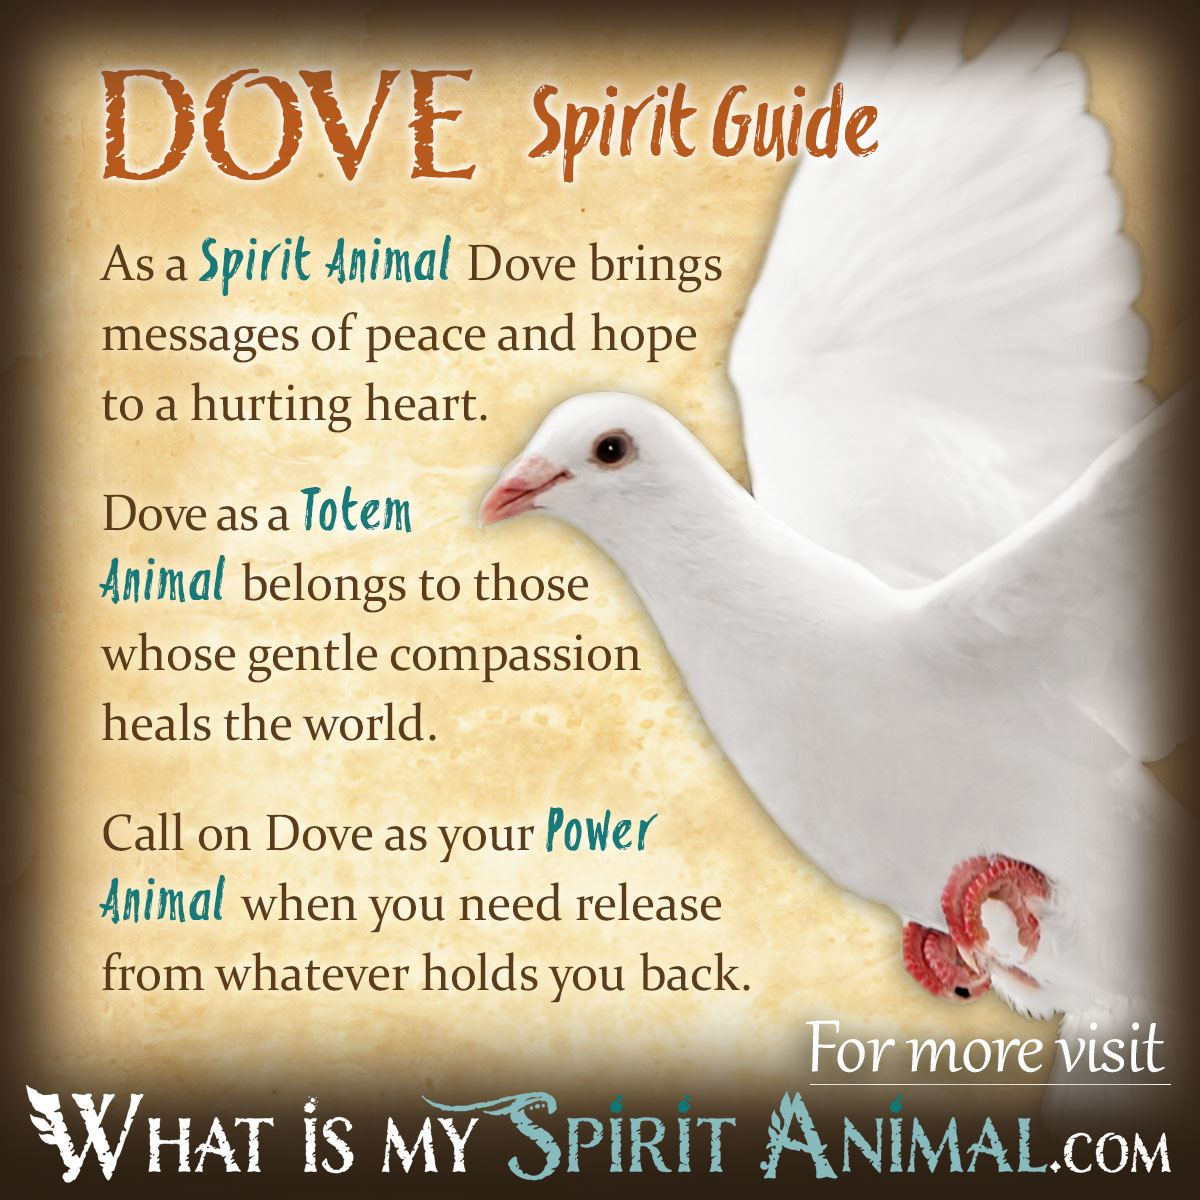 What is the spiritual meaning of a dove?